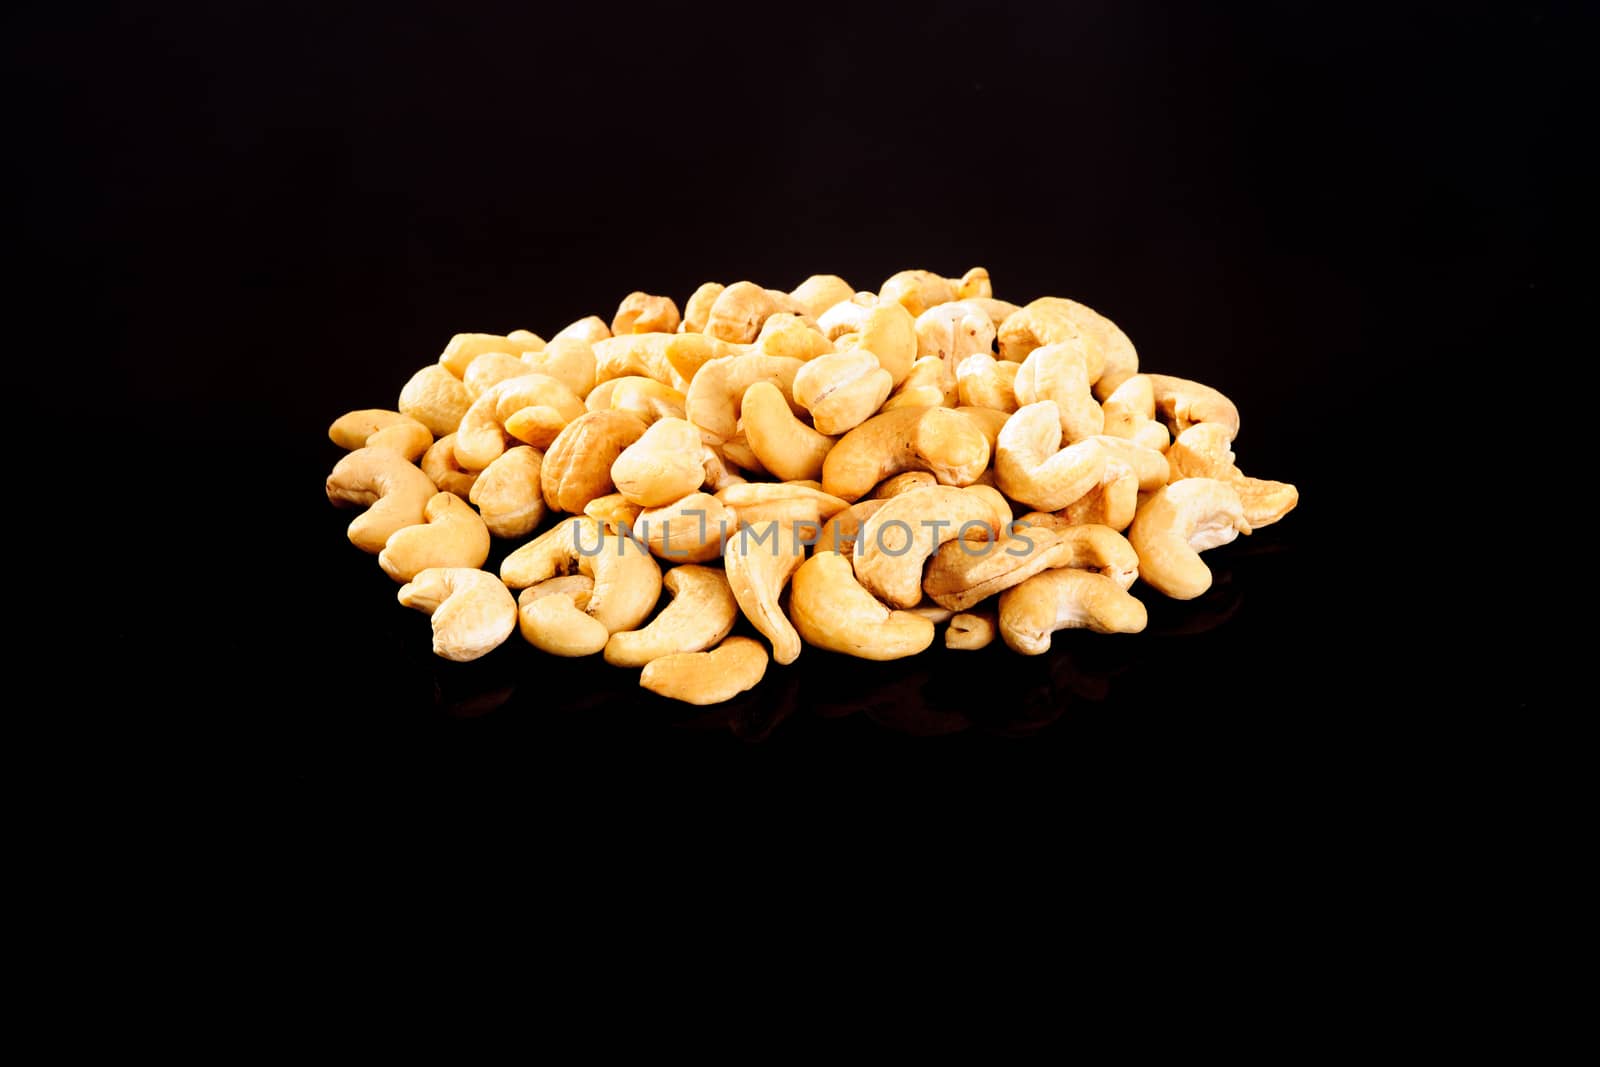 Raw Cashew Nuts on a black background